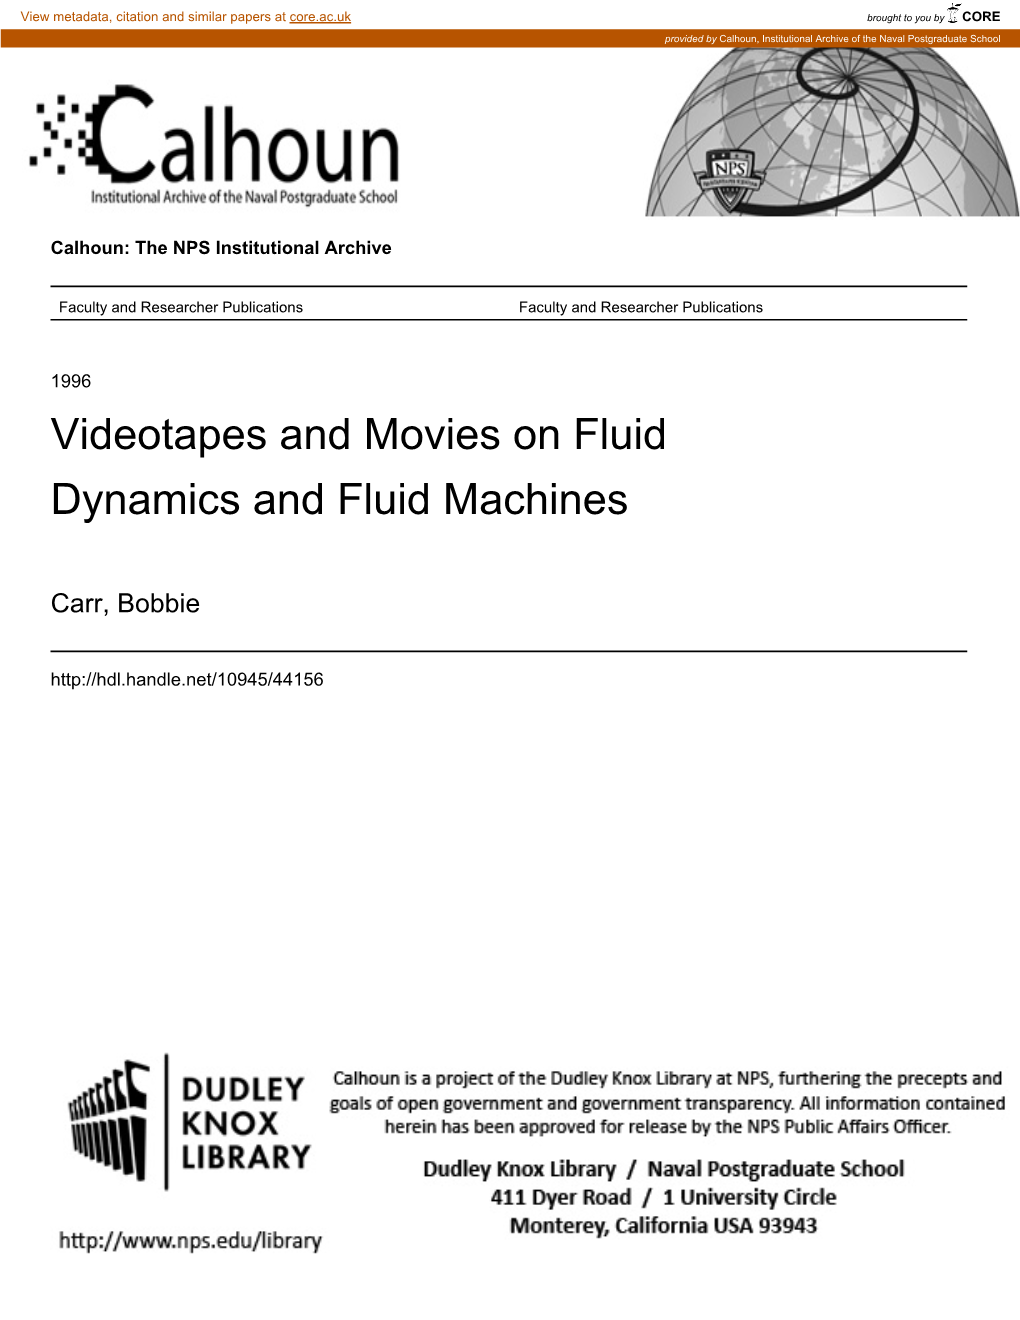 Videotapes and Movies on Fluid Dynamics and Fluid Machines